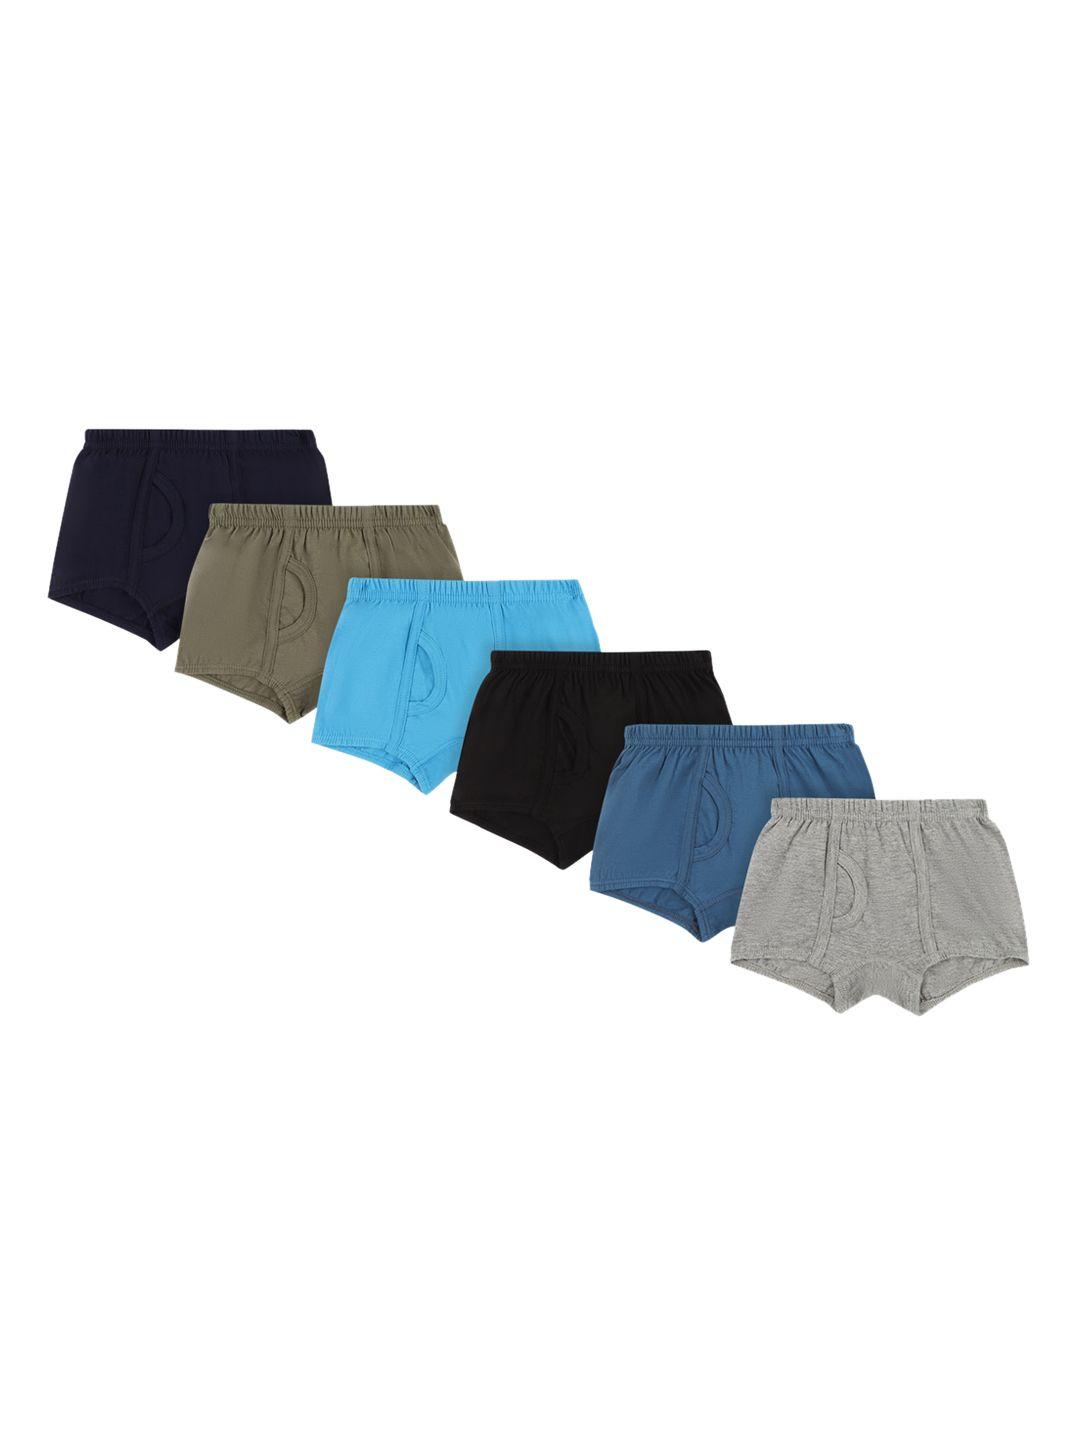 bodycare kids boys pack of 6 assorted solid cotton trunk kia004-pk009_p6